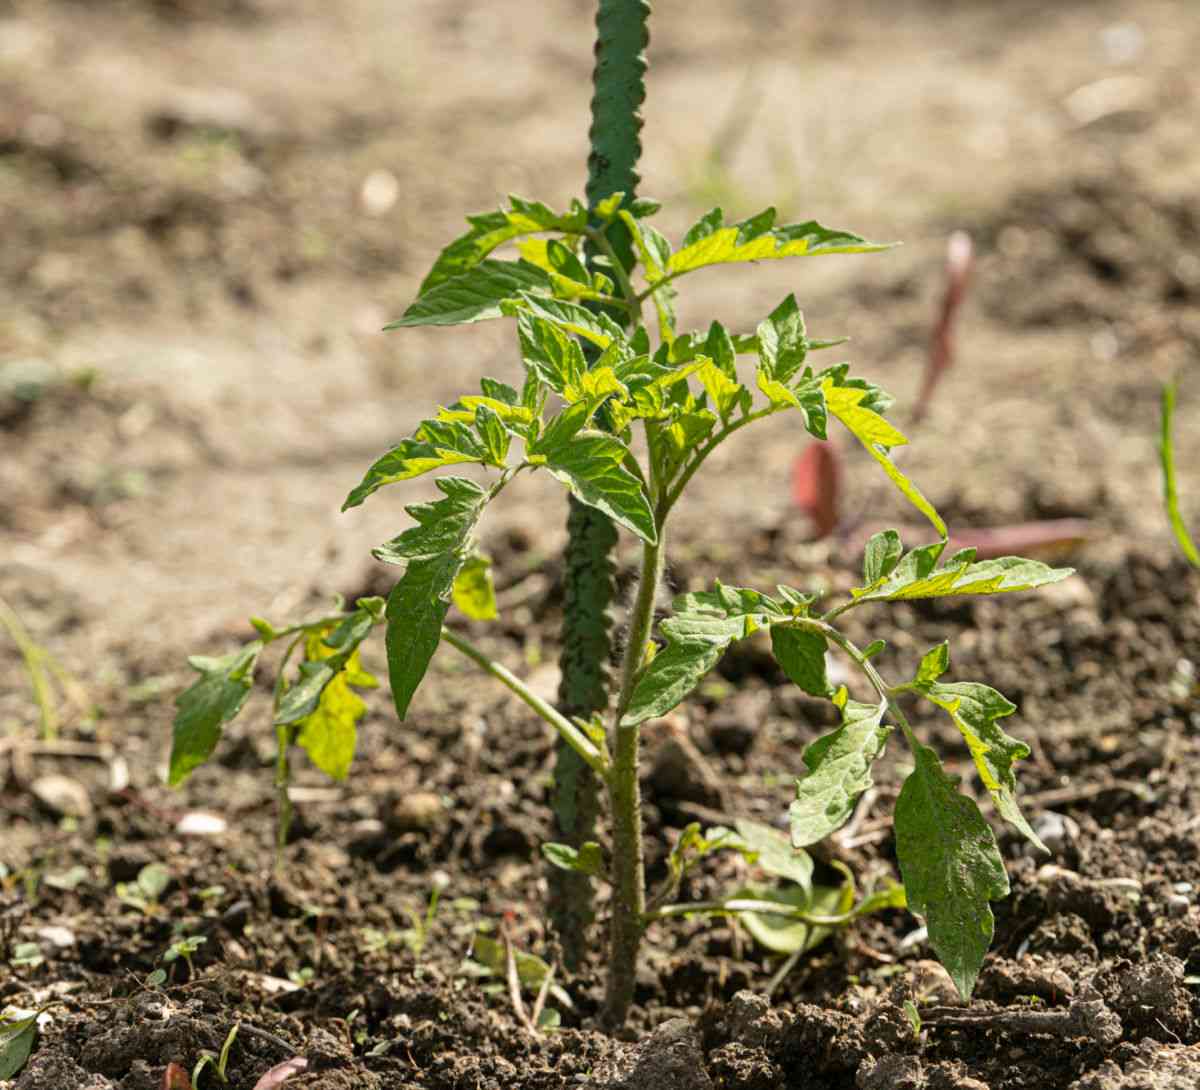 Staking a young tomato plant.